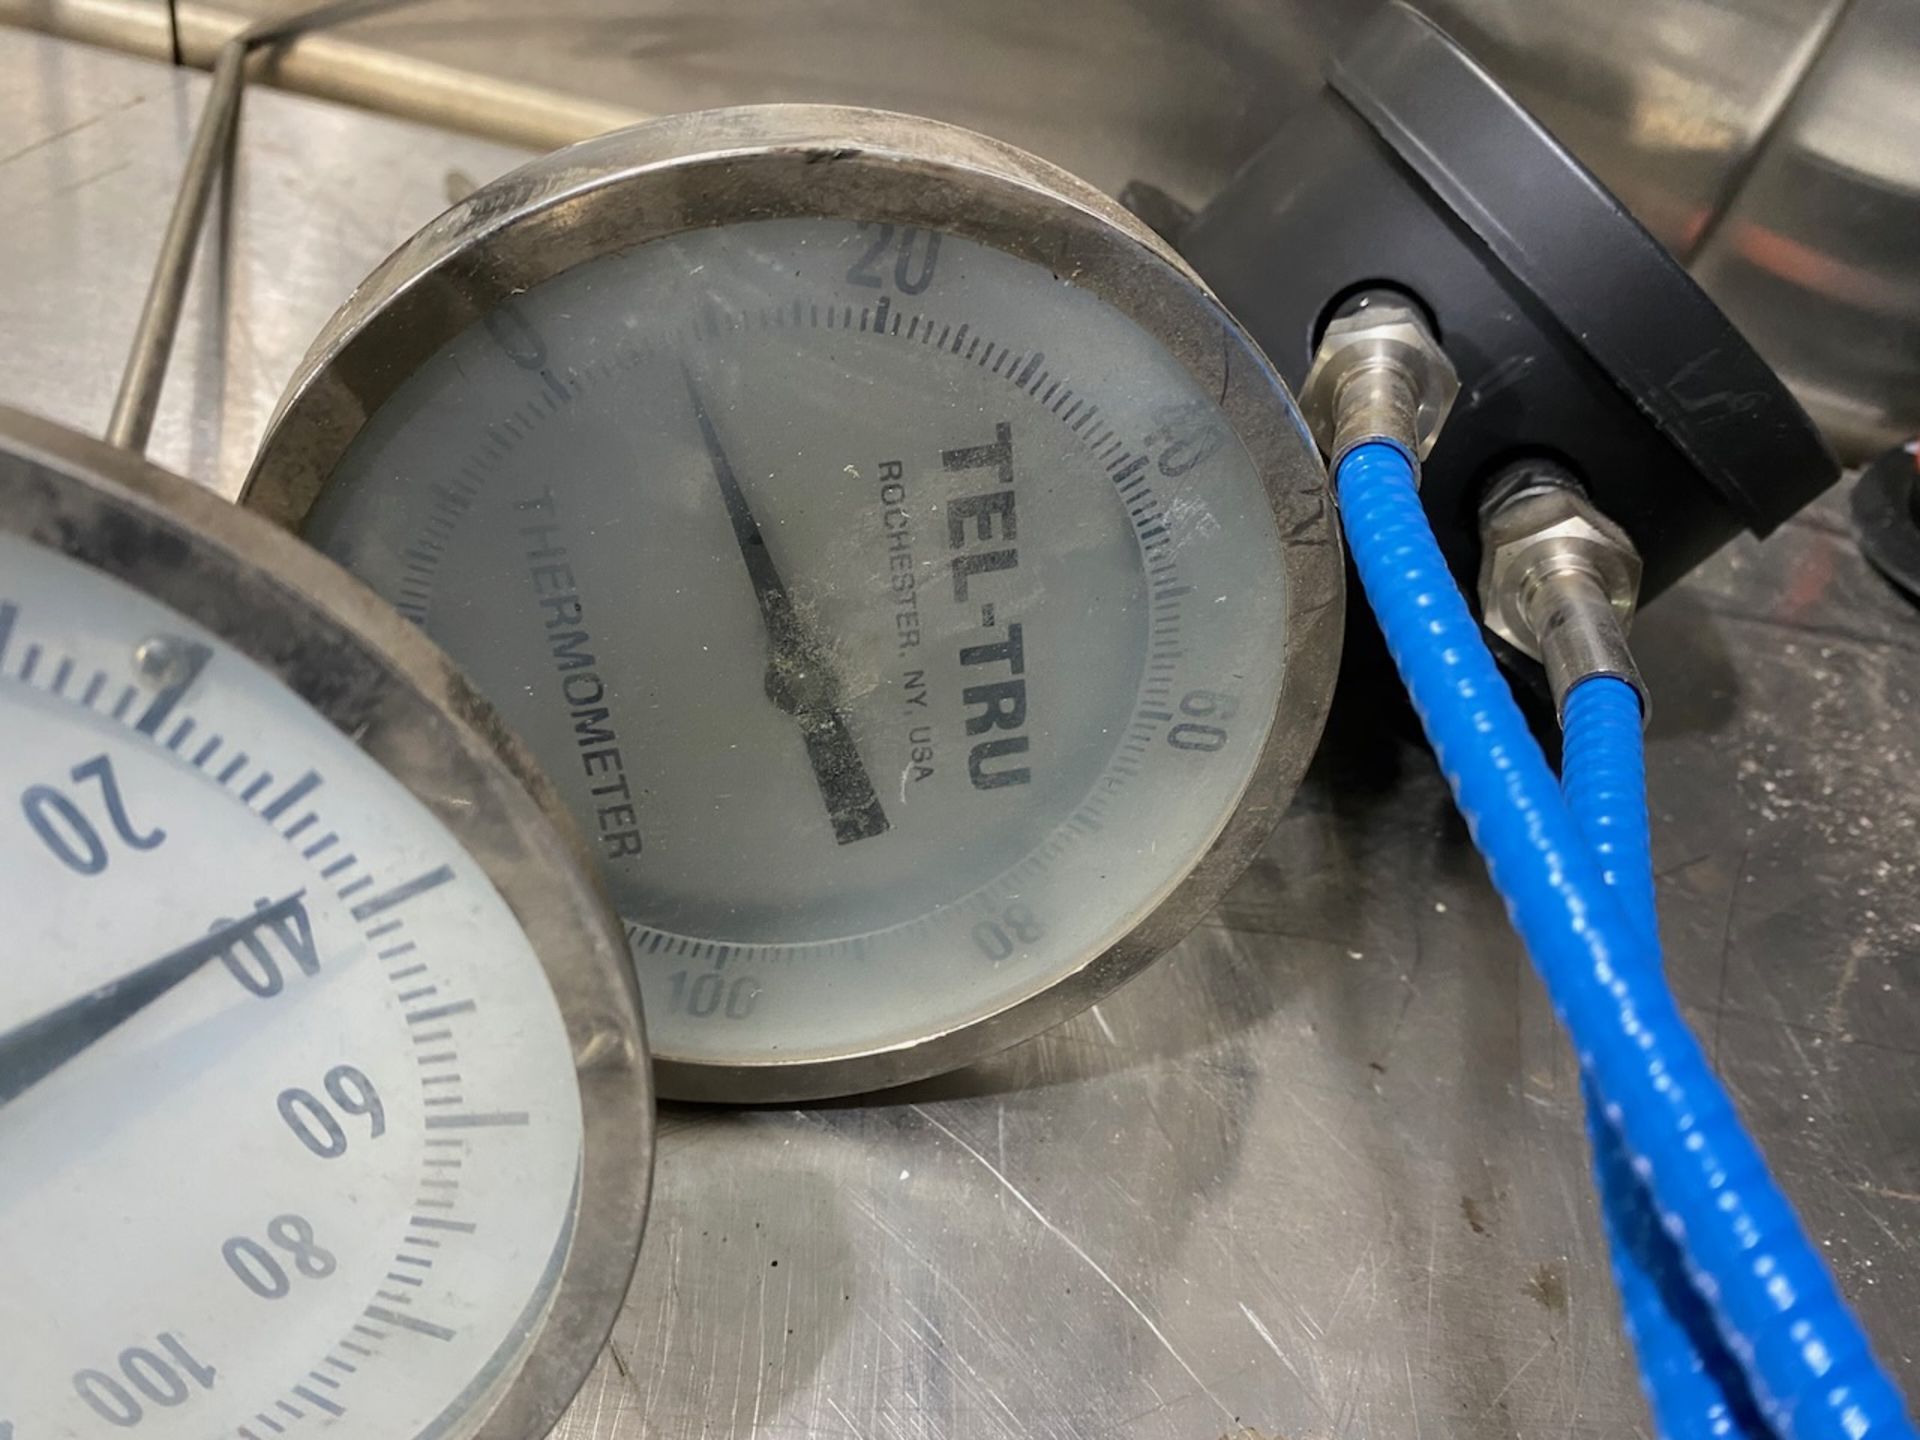 Lot of Pressure and Temperature Gauges - Image 7 of 9